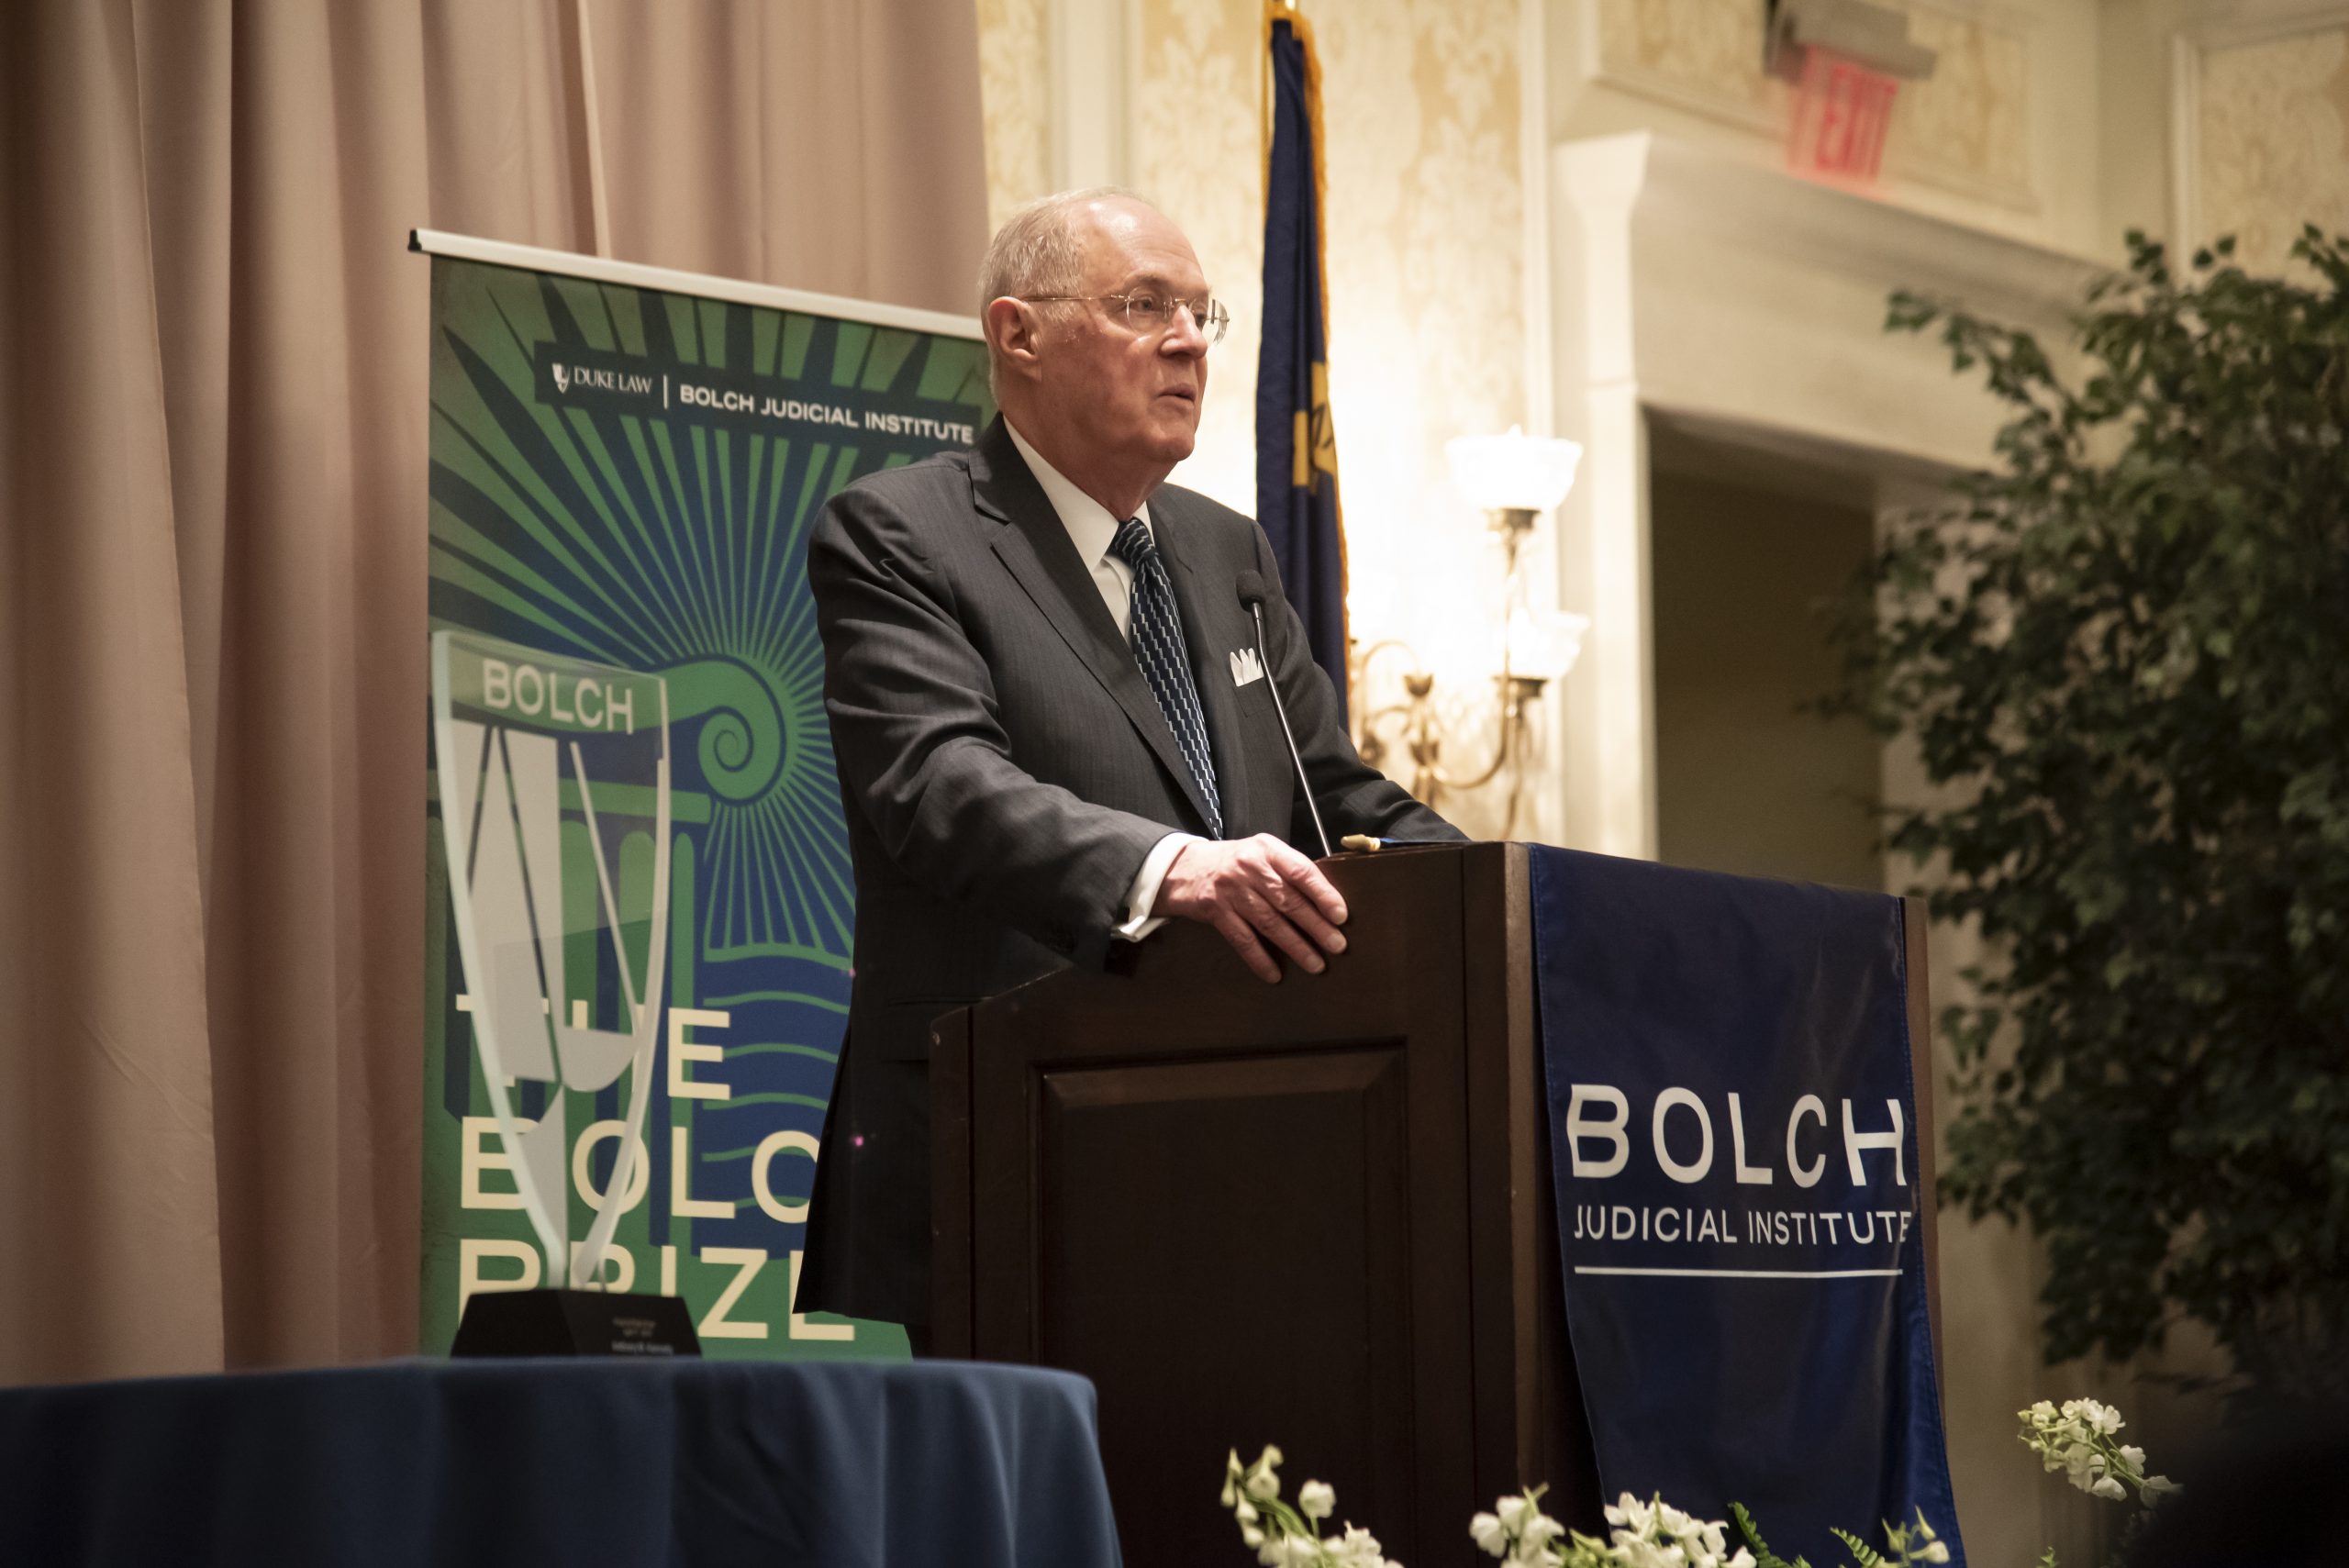 Justice Anthony Kennedy receiving the Bolch Prize, pictured at podium with glass prize beside him